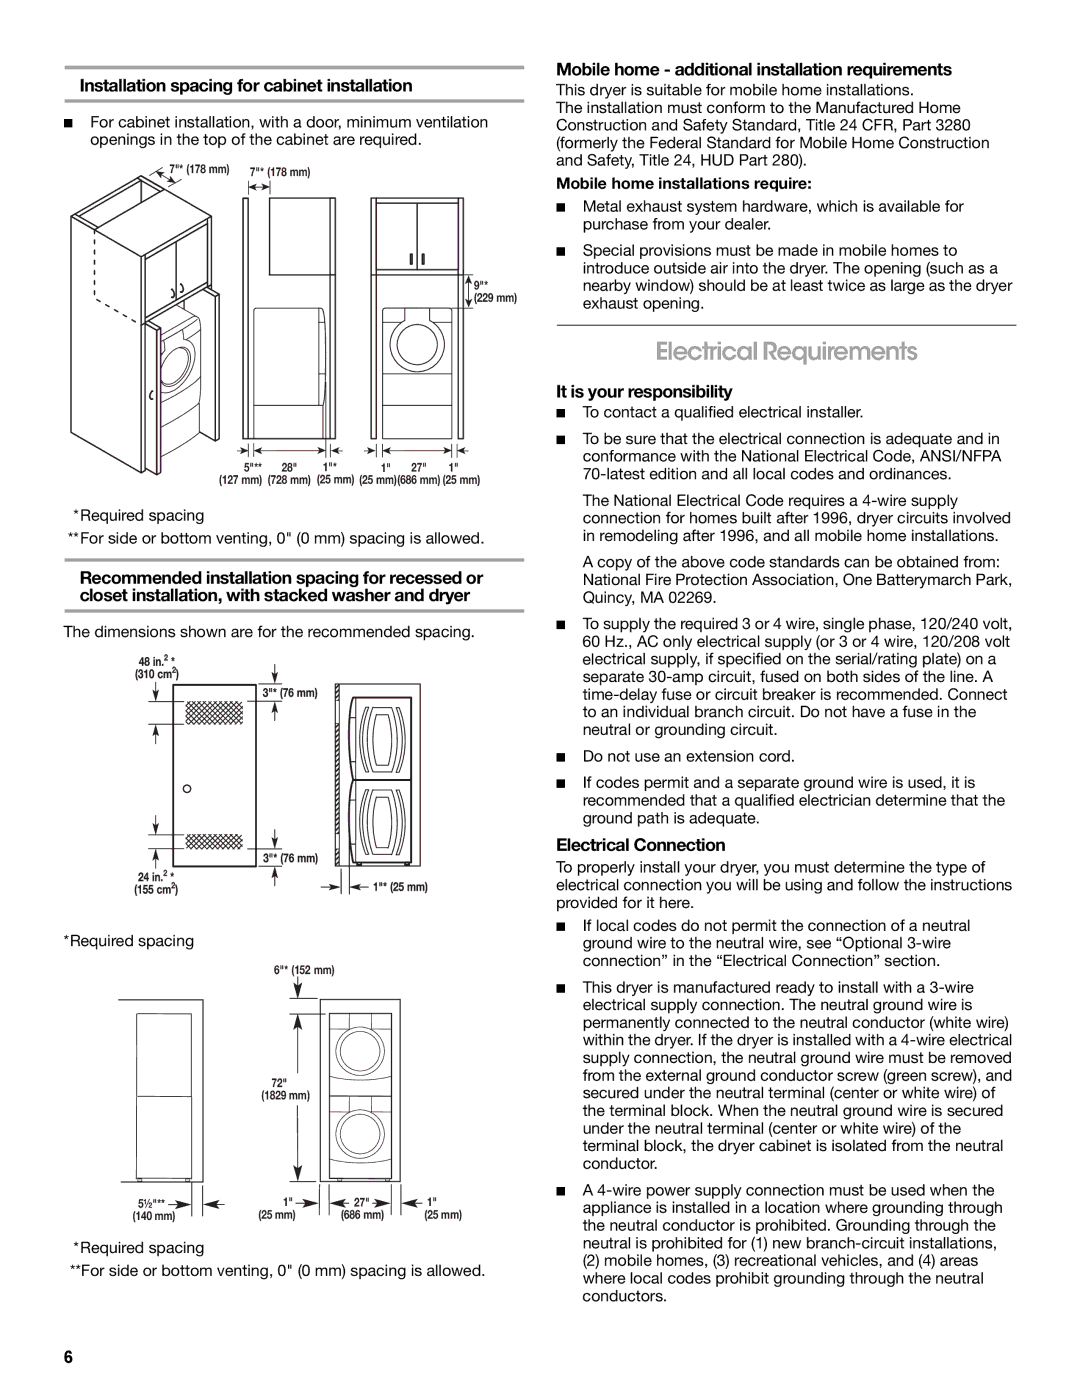 Amana W10233410A manual Electrical Requirements, Installation spacing for cabinet installation, It is your responsibility 